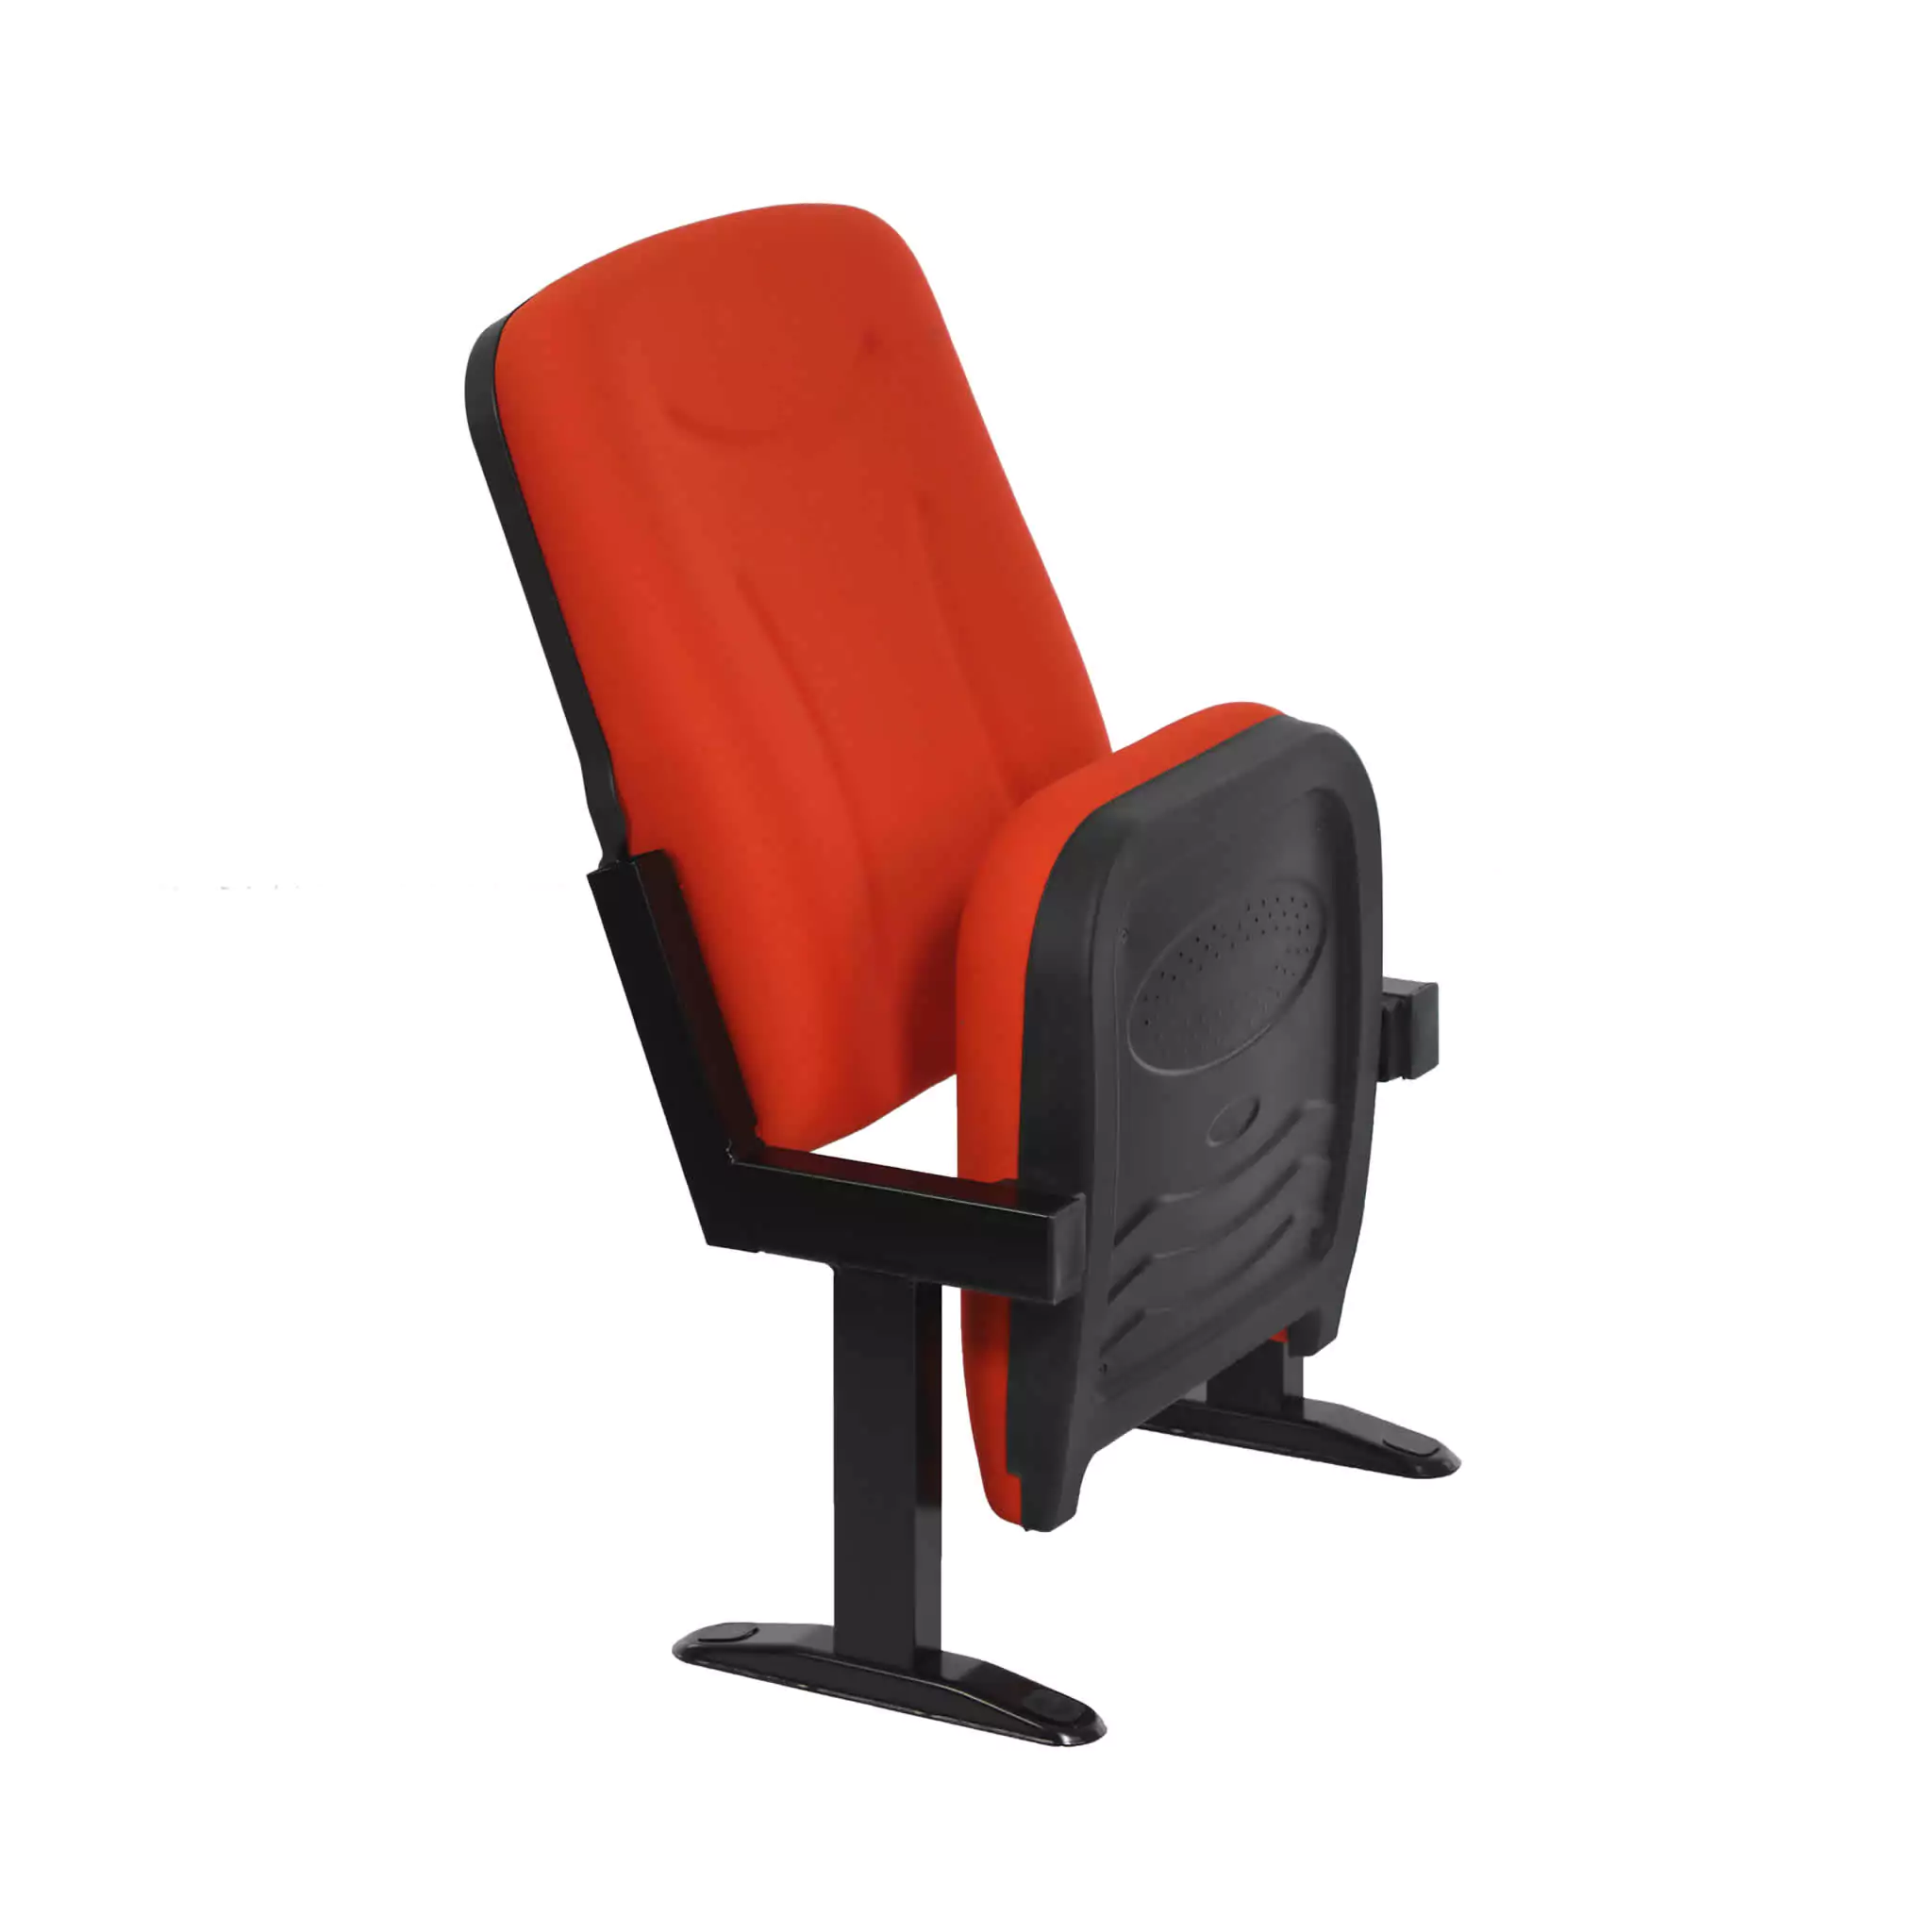 Simko Seating Products Conference Seat Zirkon S Amfi